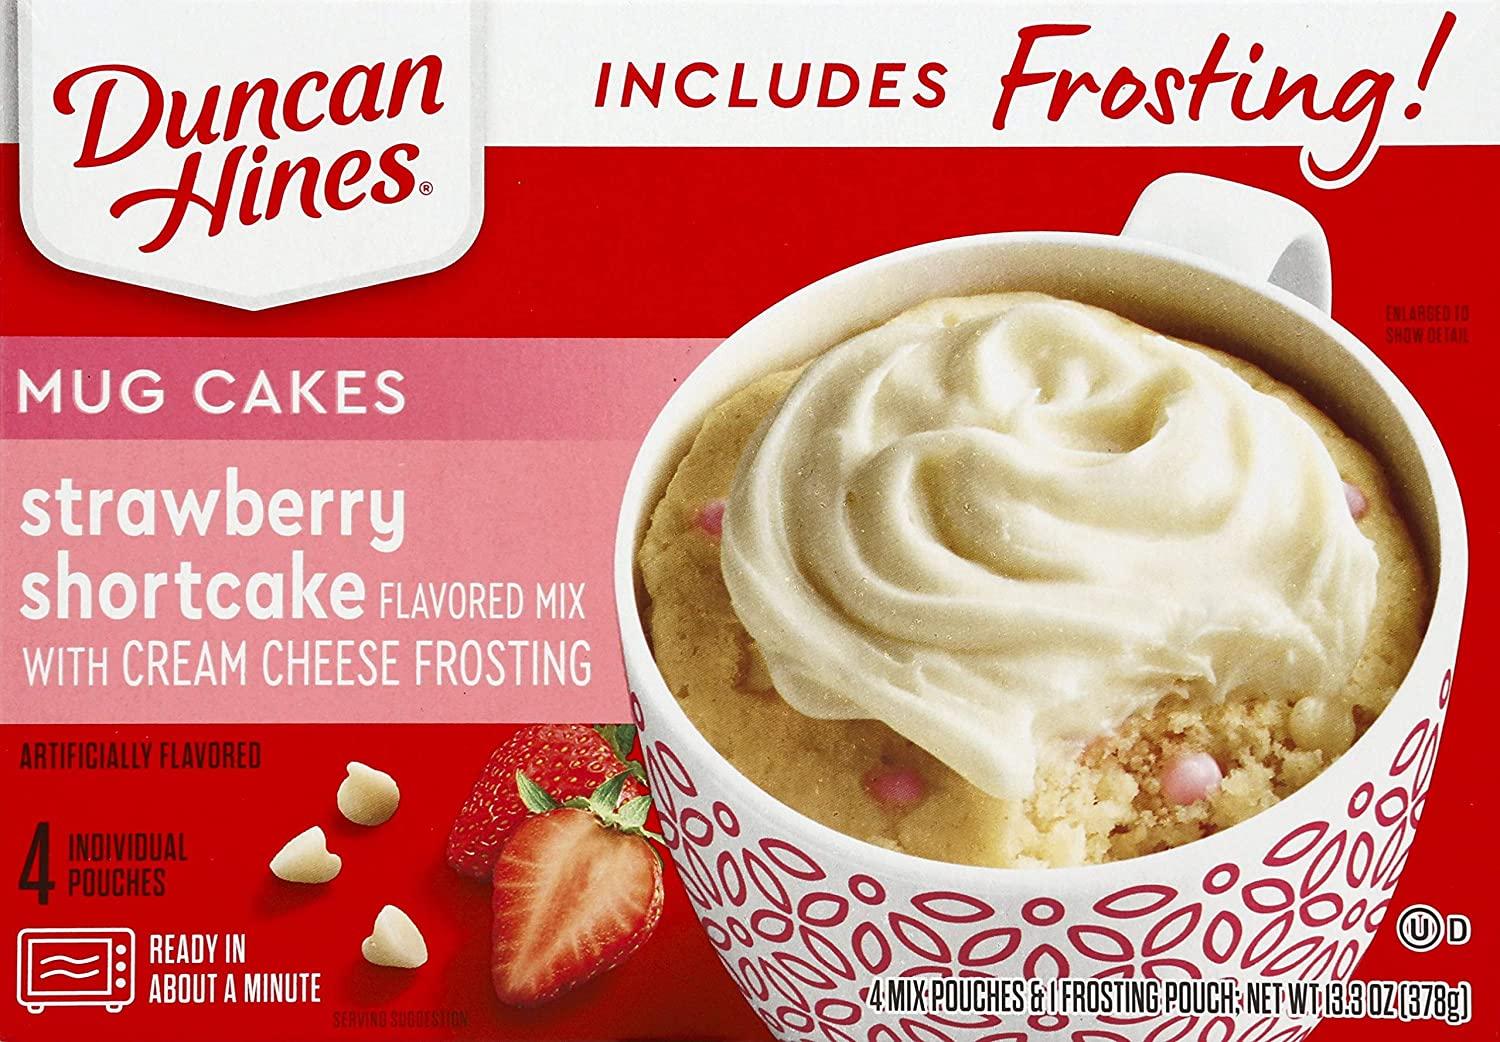 4 Duncan Hines Mug Cakes for $1.74 Shipped